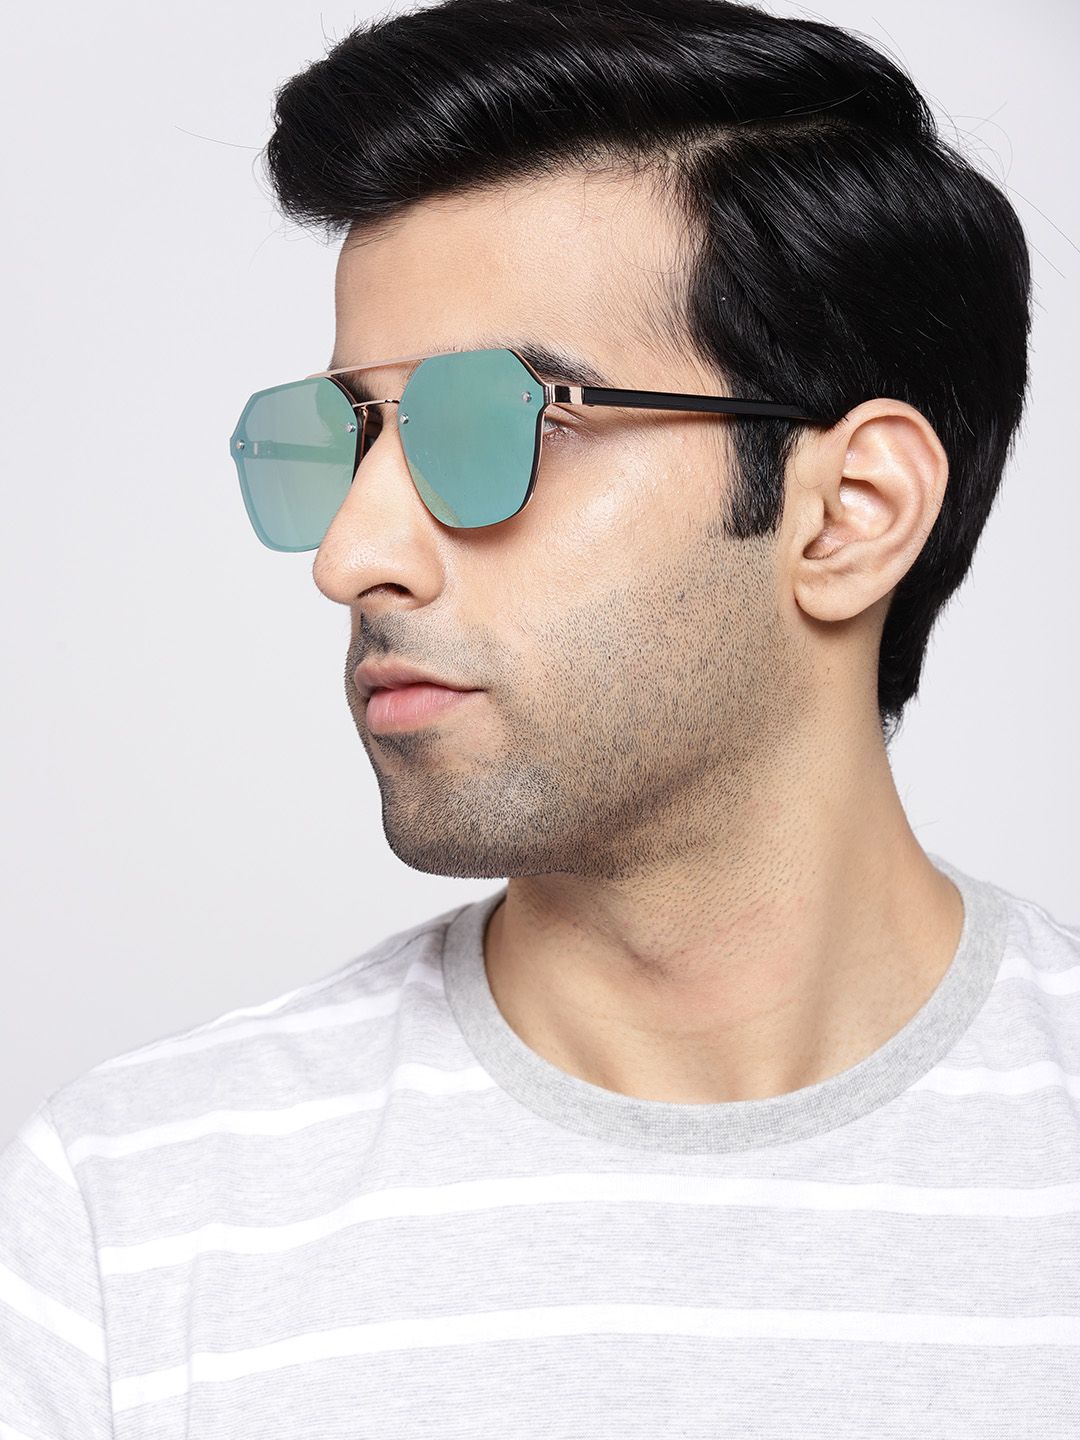 The Roadster Lifestyle Co Unisex Mirrored Square Sunglasses MFB-PN-PS-T9578 Price in India